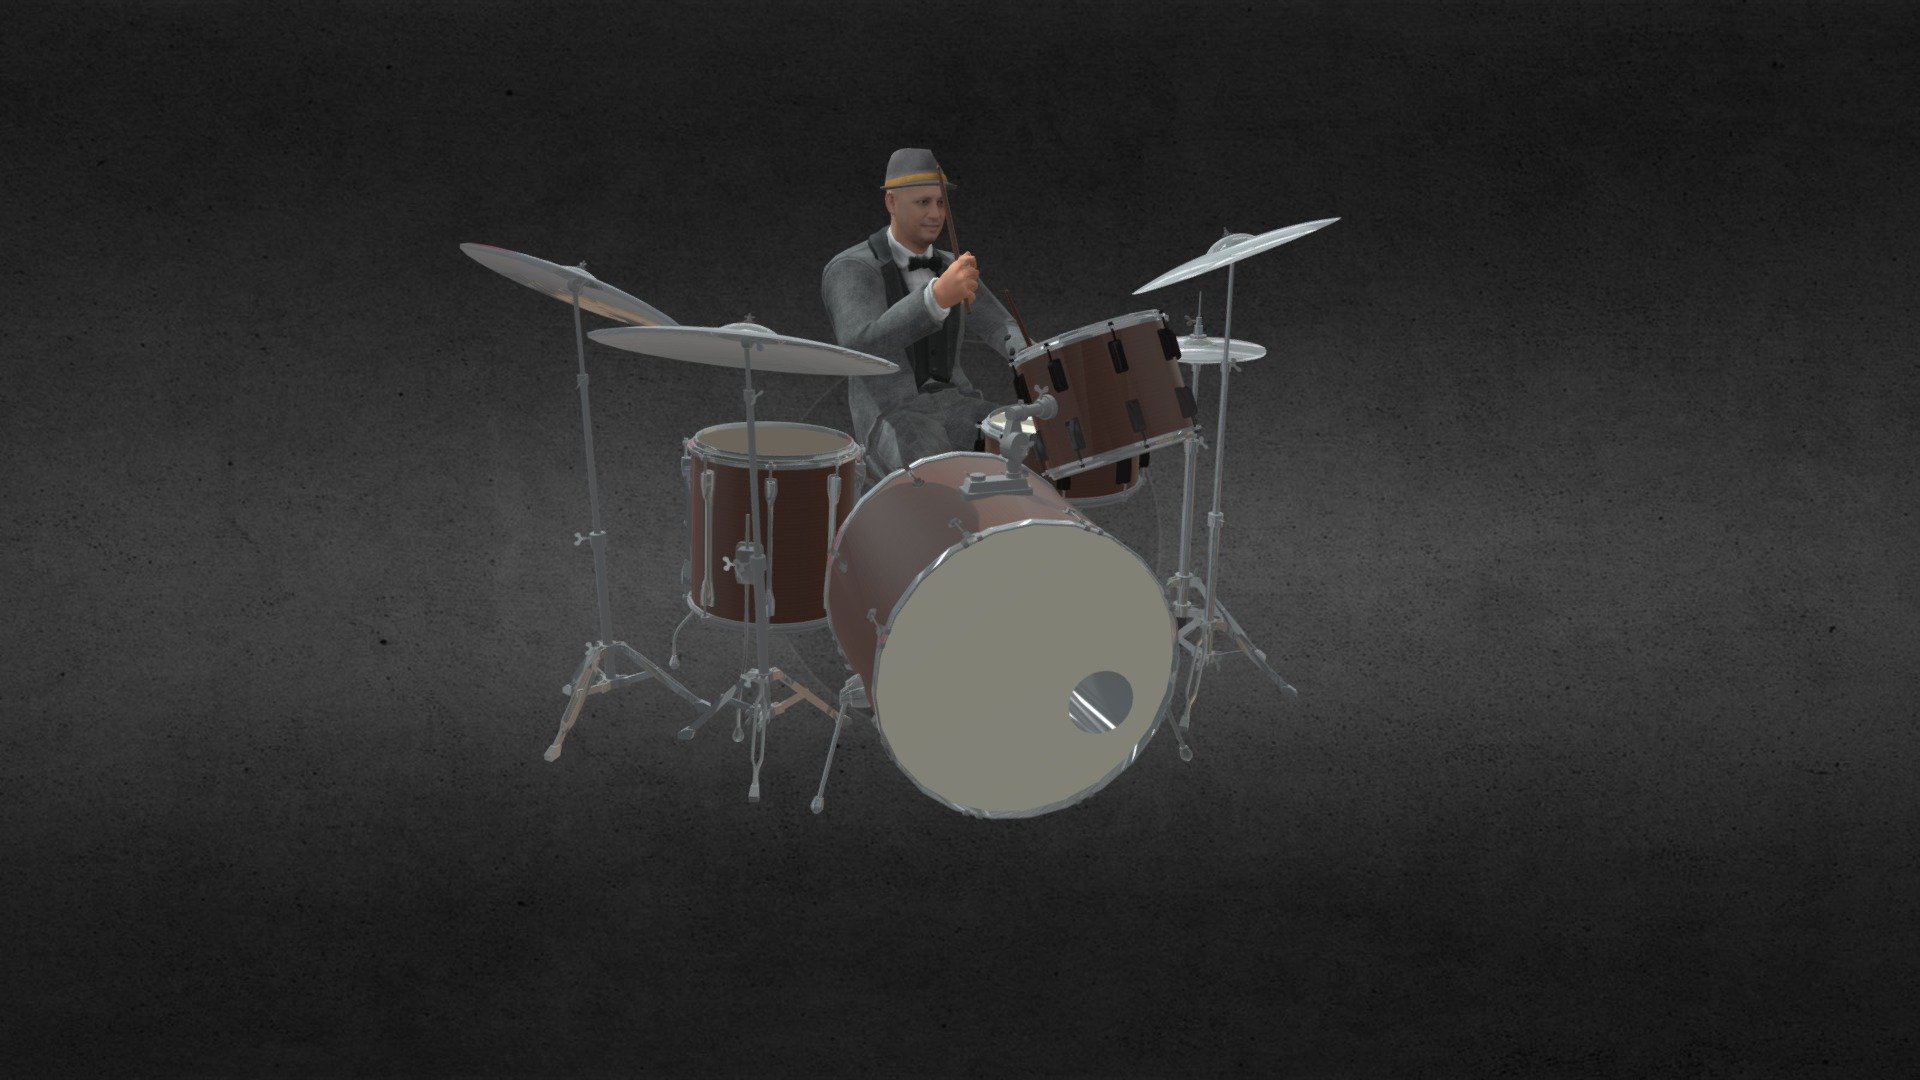 Model of Drummer with Jazz Drum Kit model for background 3D model, you can find other musicians jazz band group in my other models animation - Jazz Drummer Musician with DrumKit Animation - Buy Royalty Free 3D model by imanboer 3d model